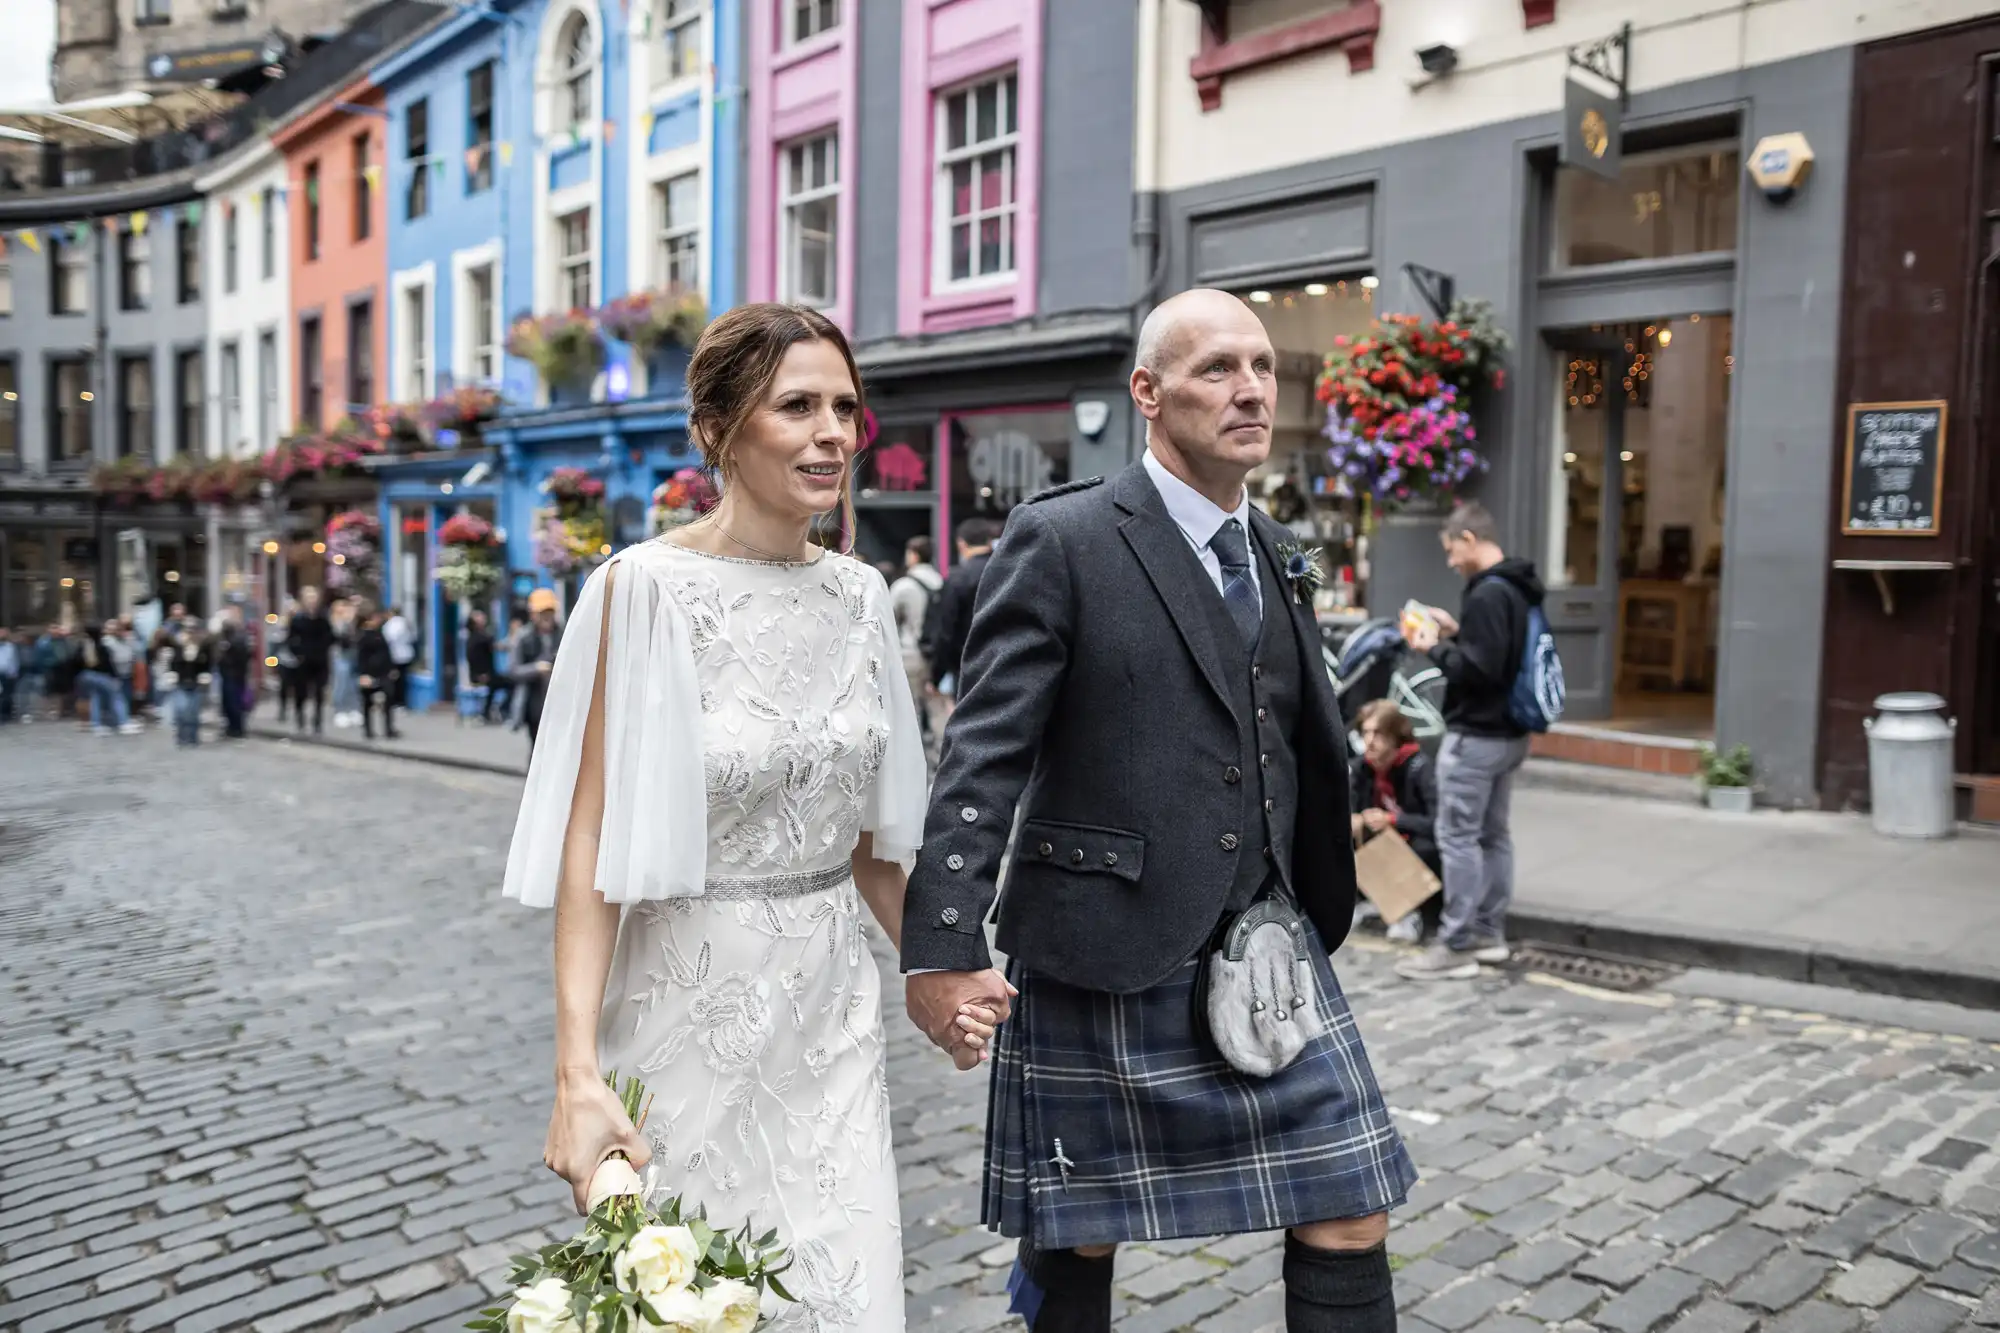 A couple dressed in wedding attire walks hand in hand on a cobblestone street lined with colorful buildings and shops. The woman wears a white dress, and the man wears a kilt and suit jacket.